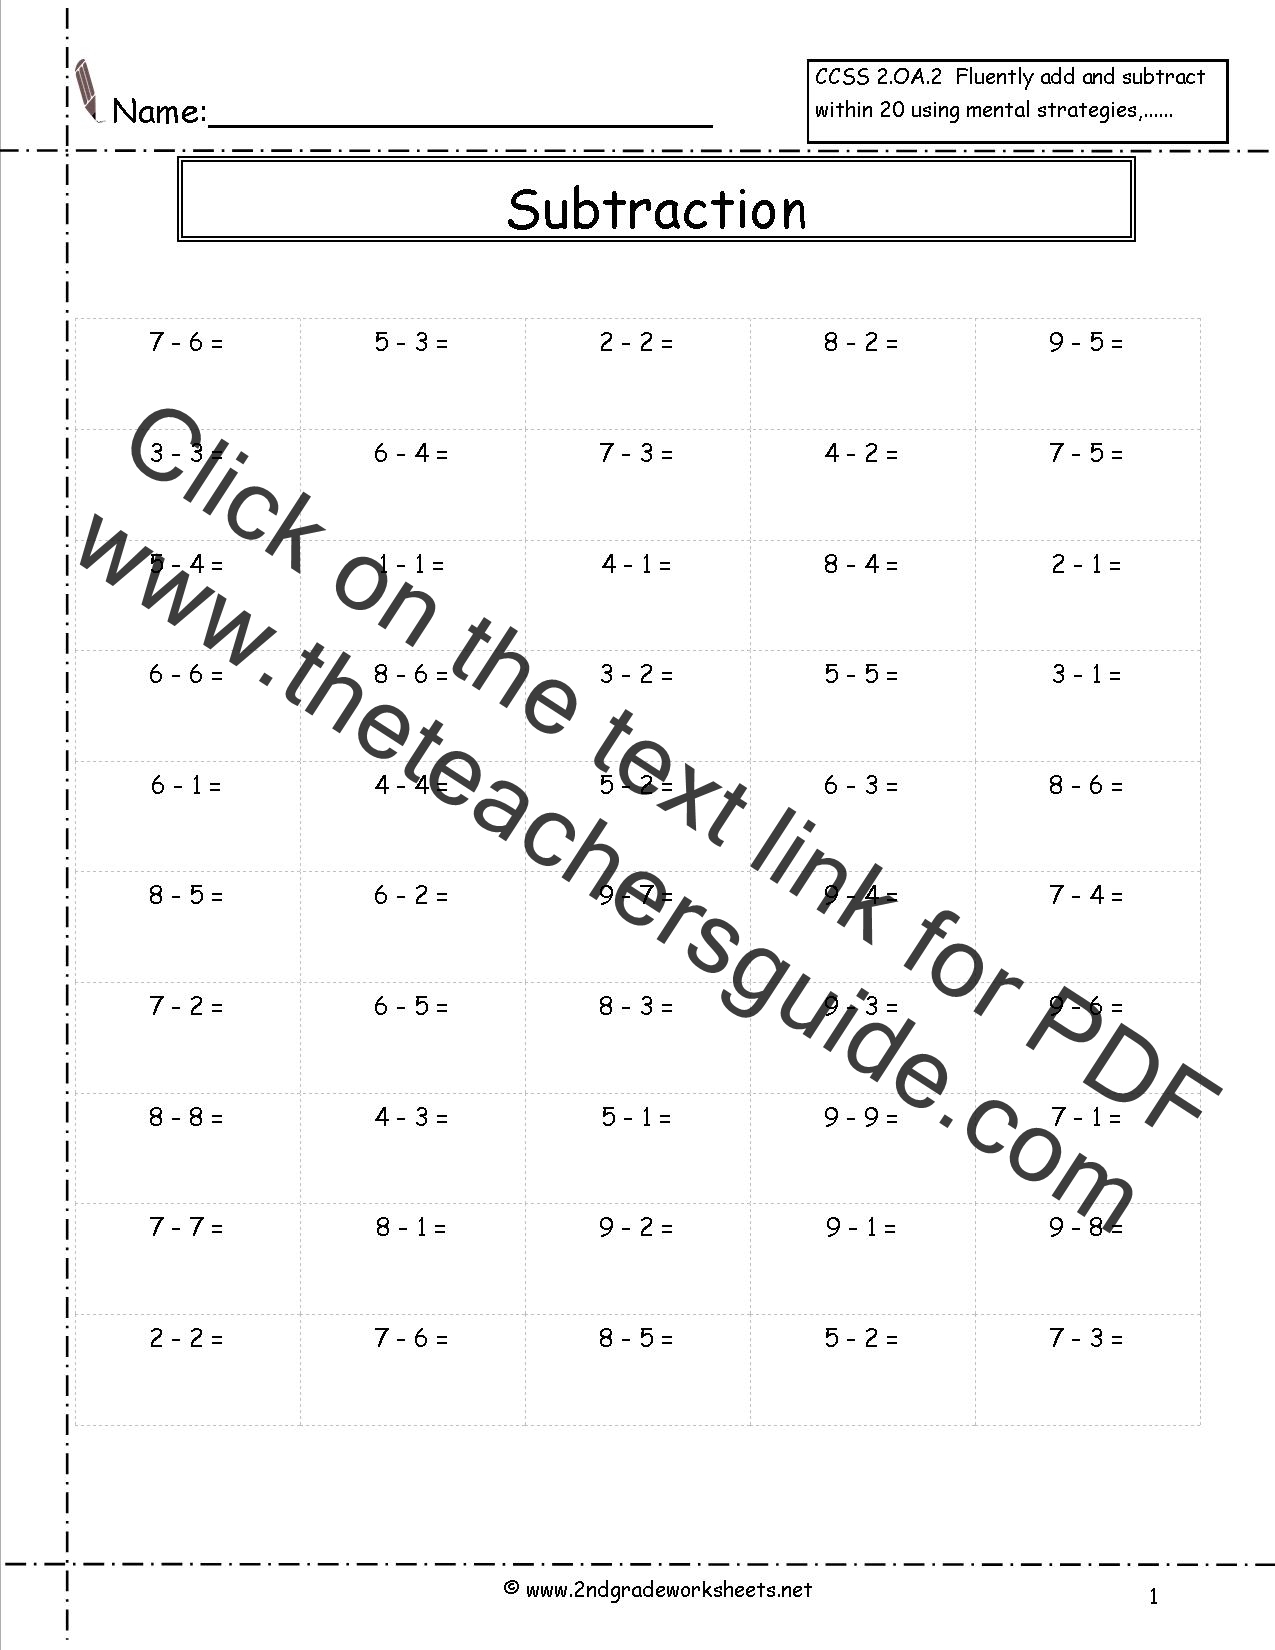 addition-fact-fluency-worksheet-timed-math-drills-addition-and-subtraction-1000-images-about